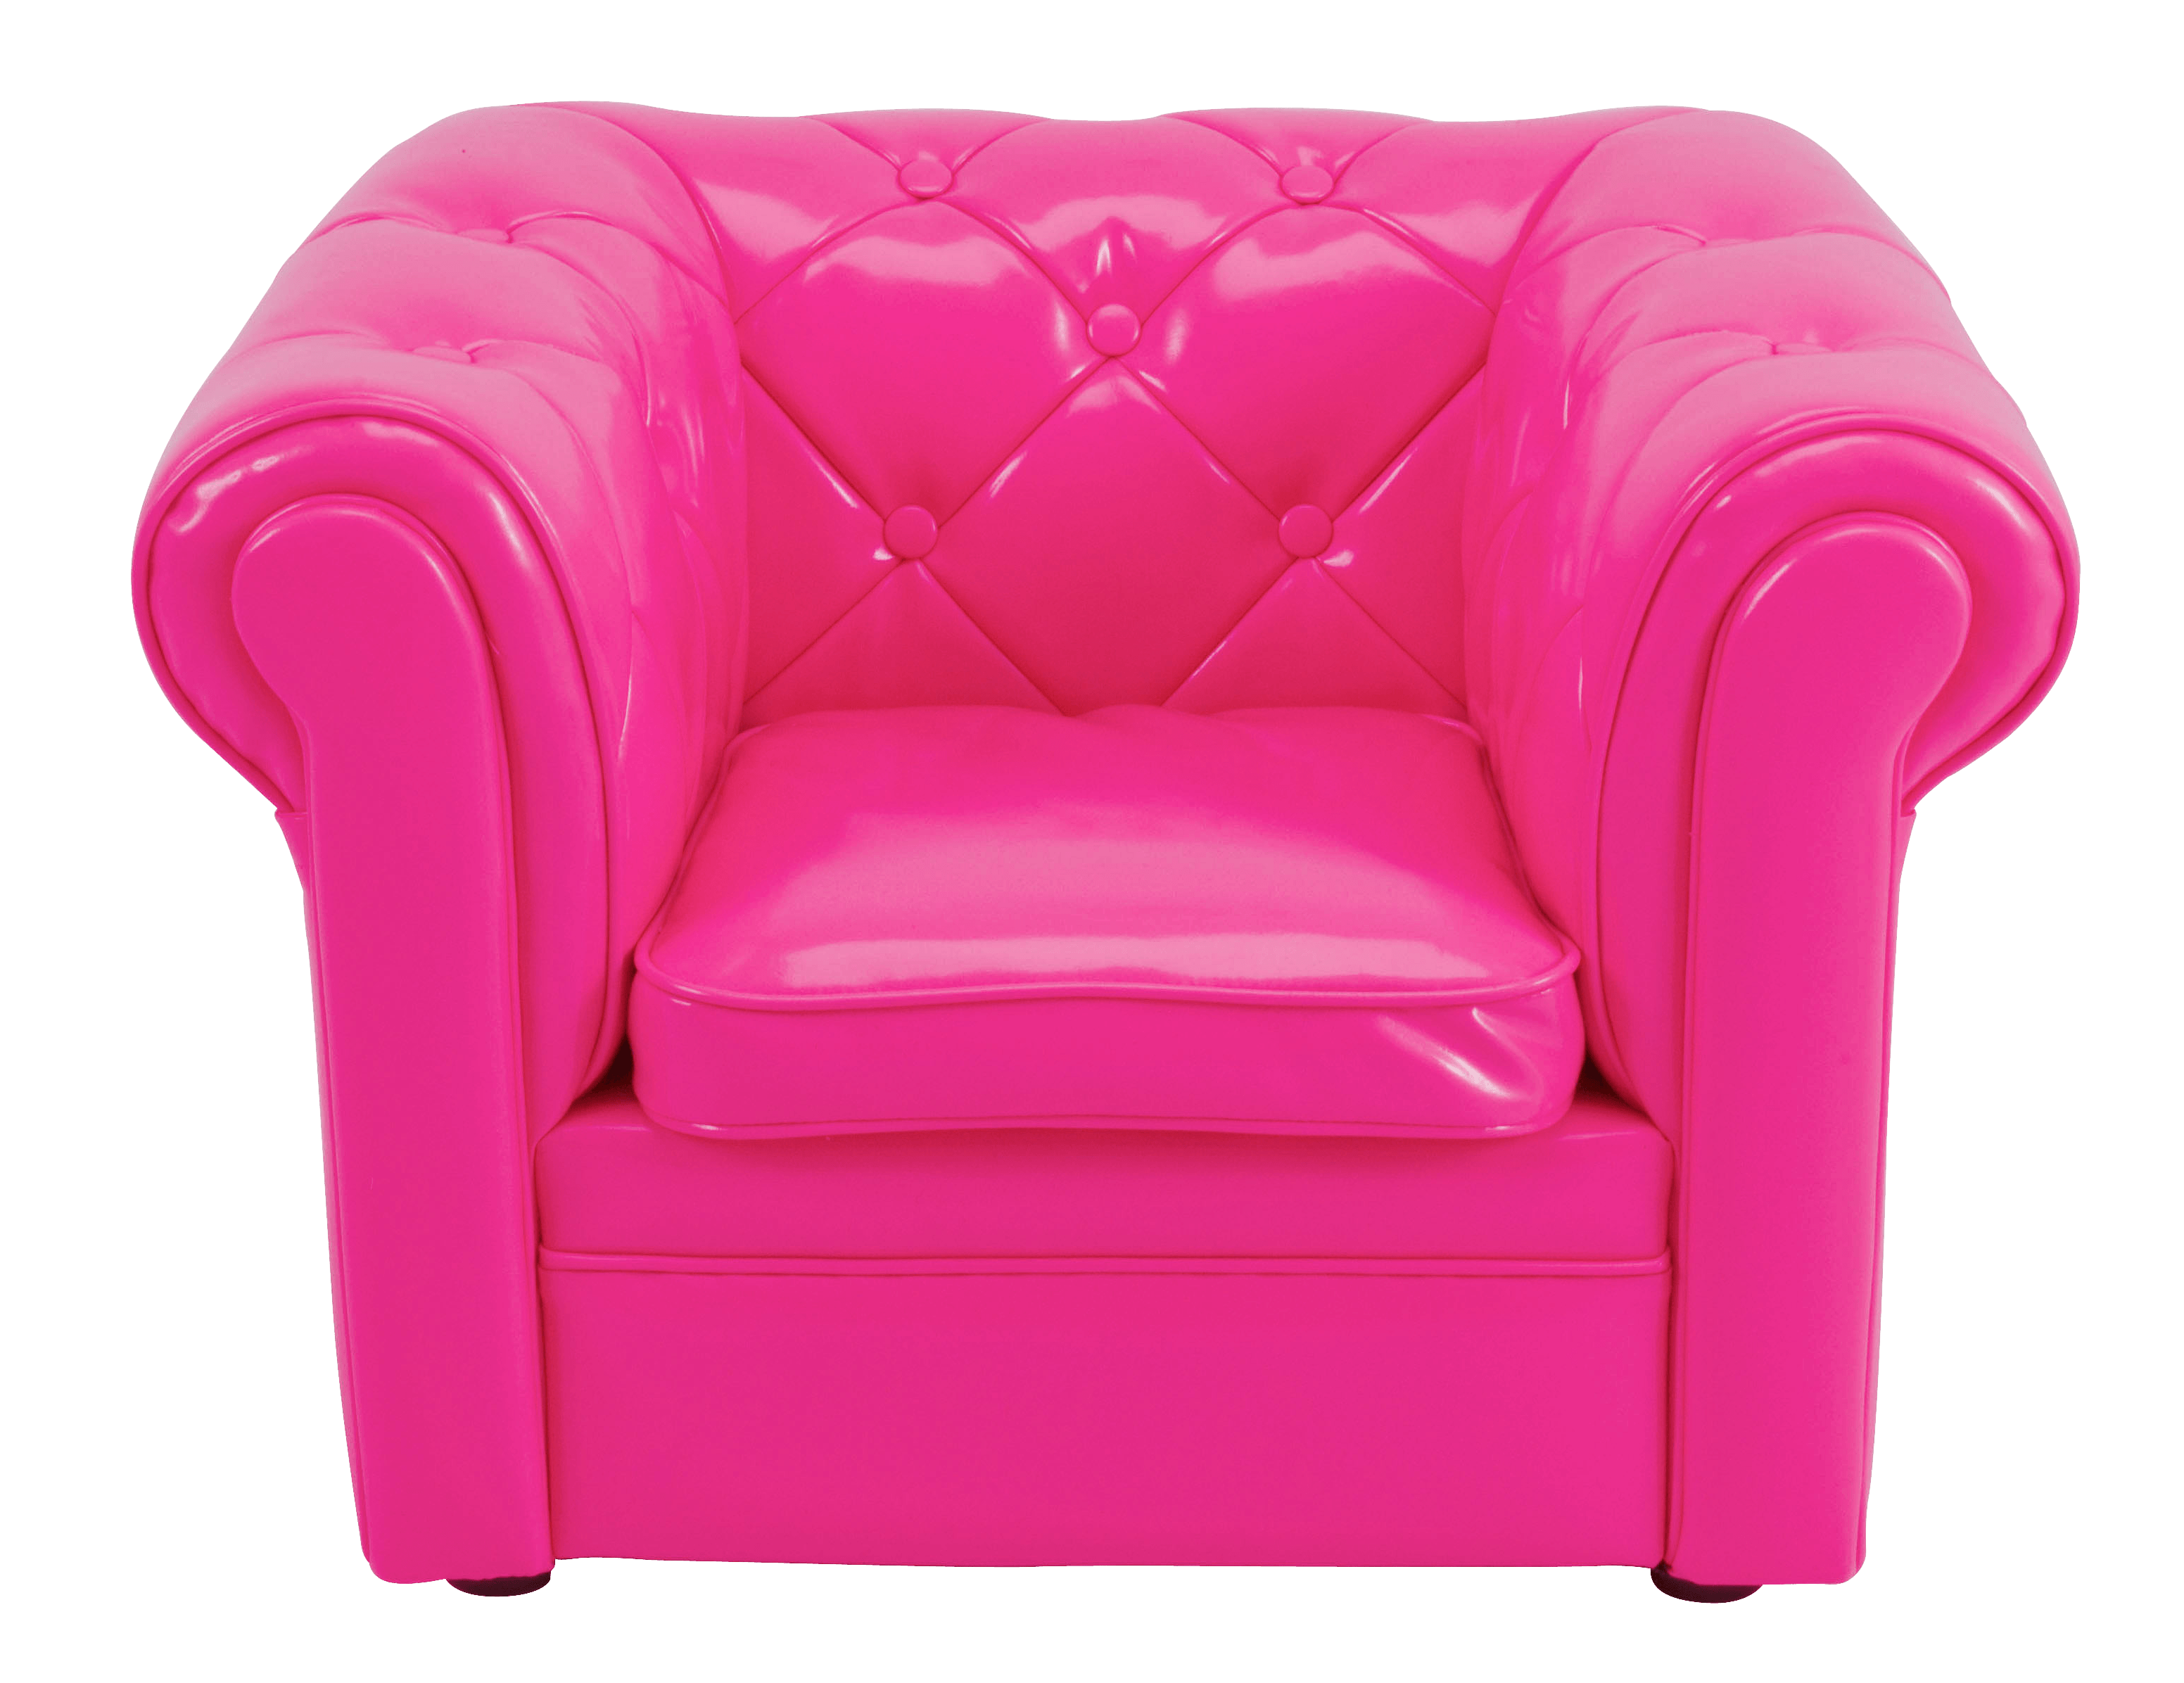 Pink Armchair PNG Image in High Definition pngteam.com